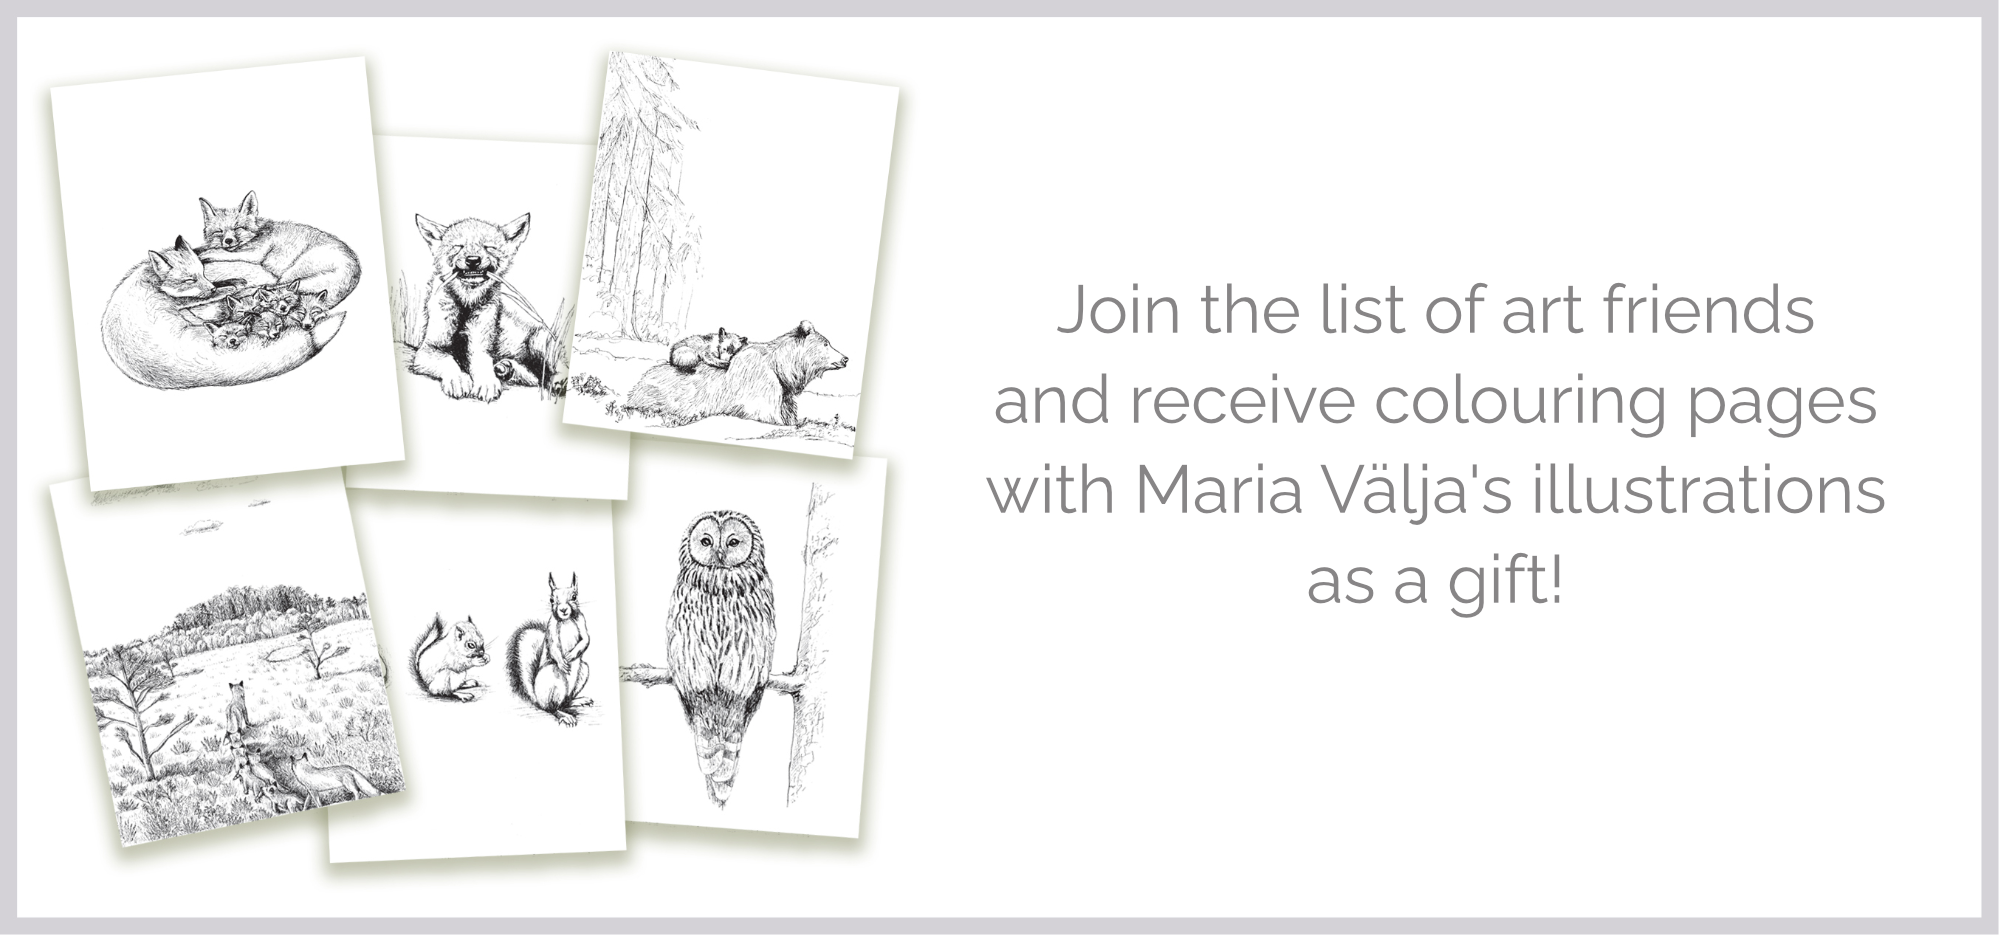 colouring pages - join the list of art friends